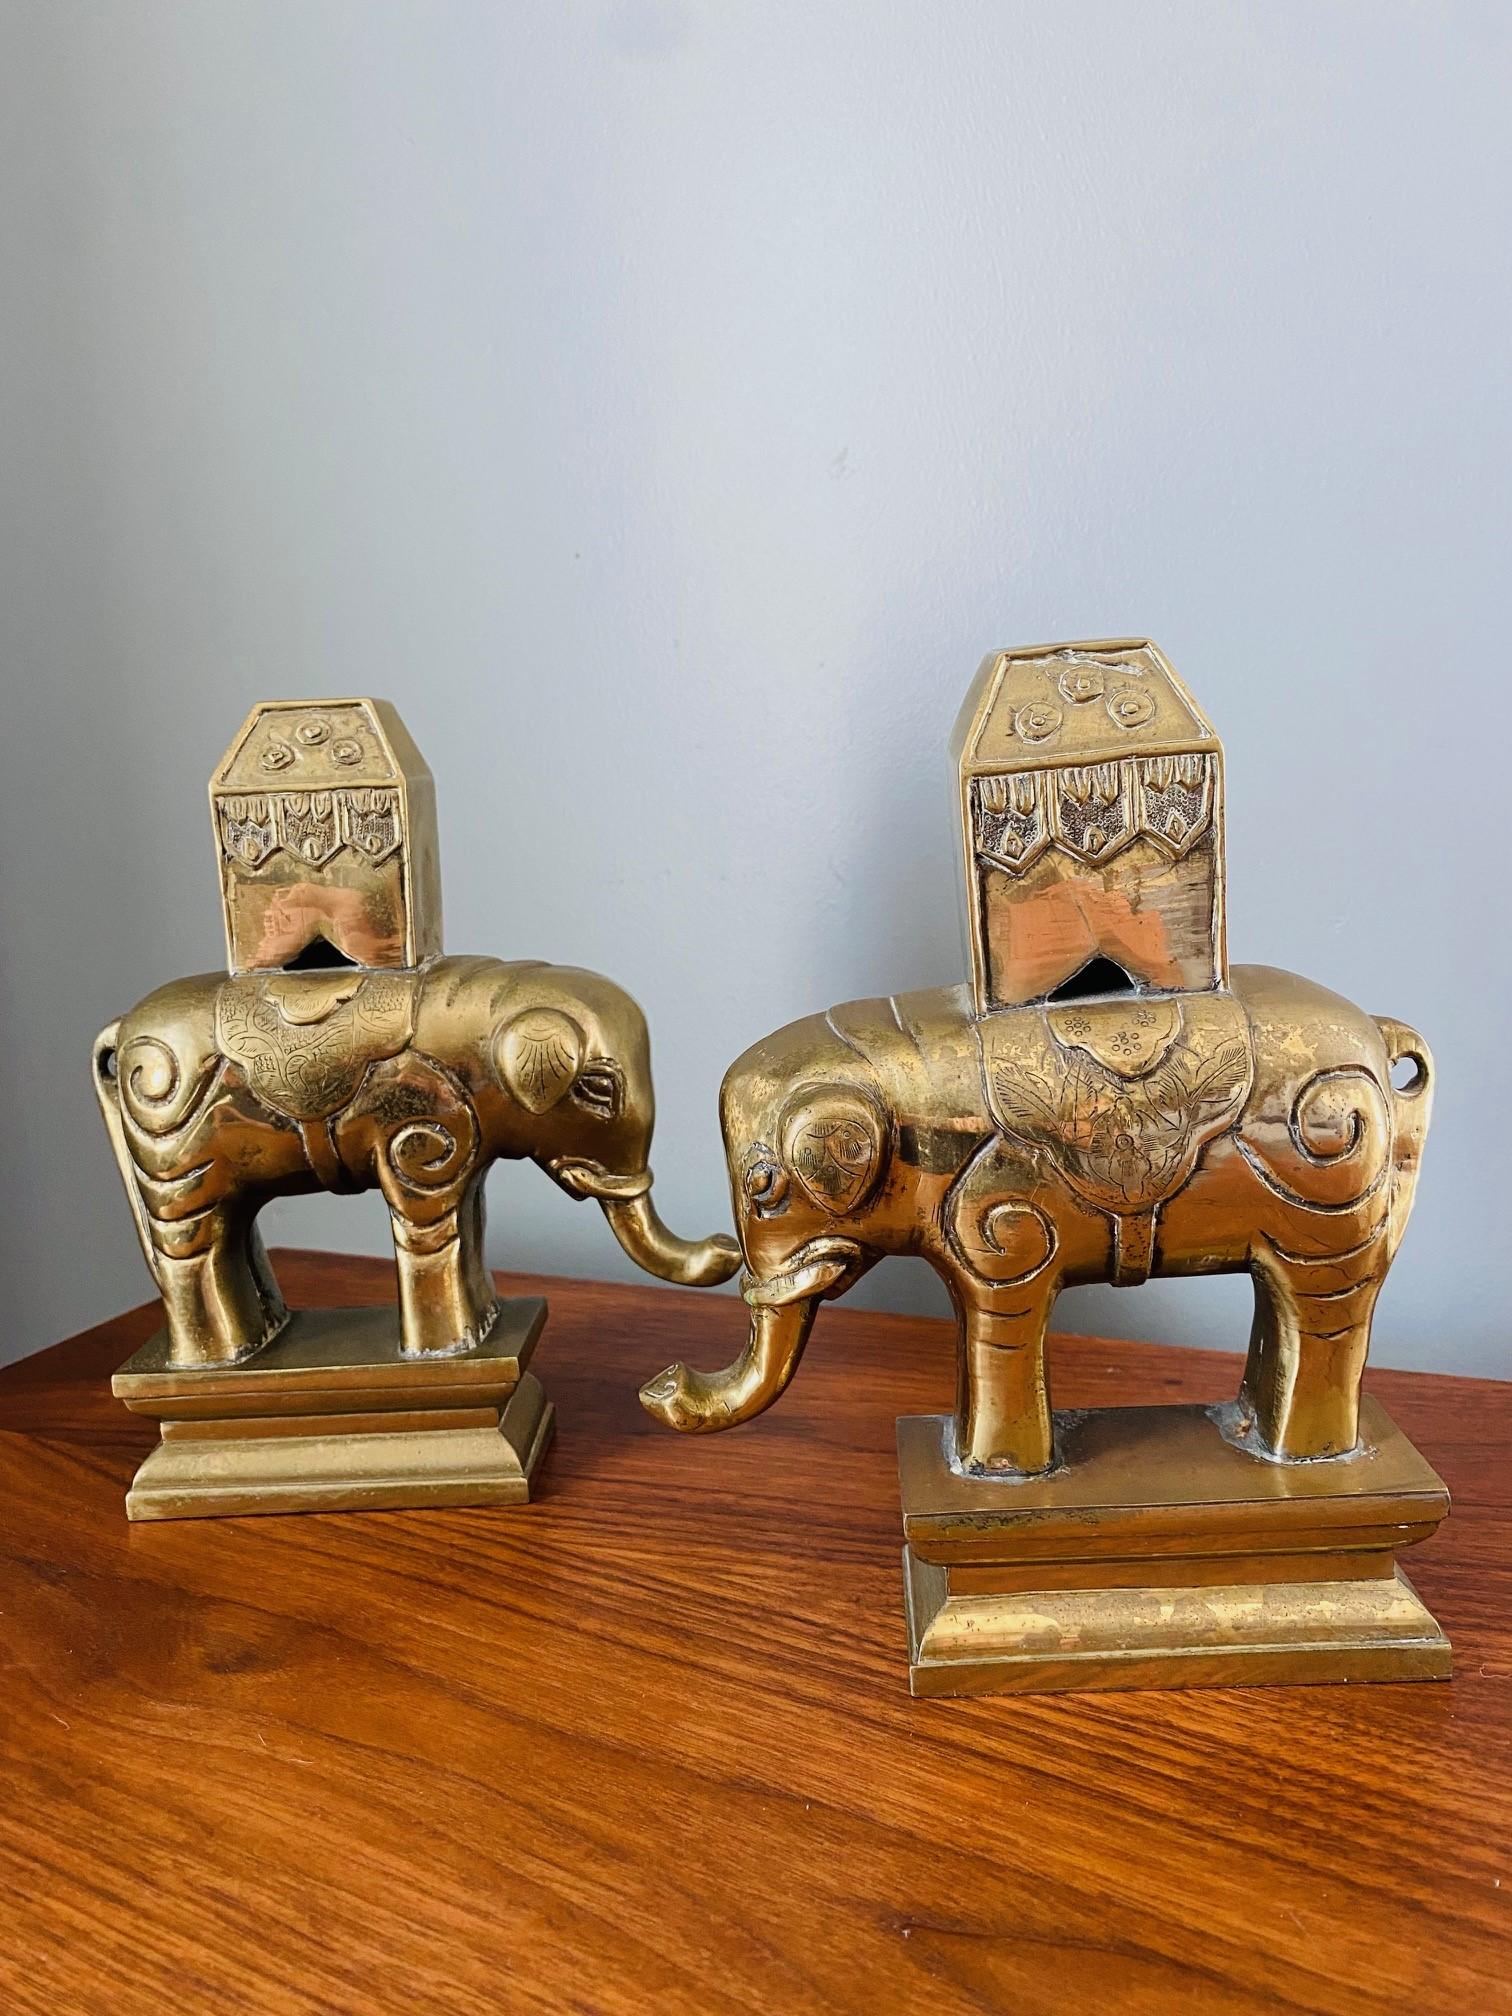 Vintage 1940s Pair of Sculptural Elephant Bookends in Solid Brass For Sale 8